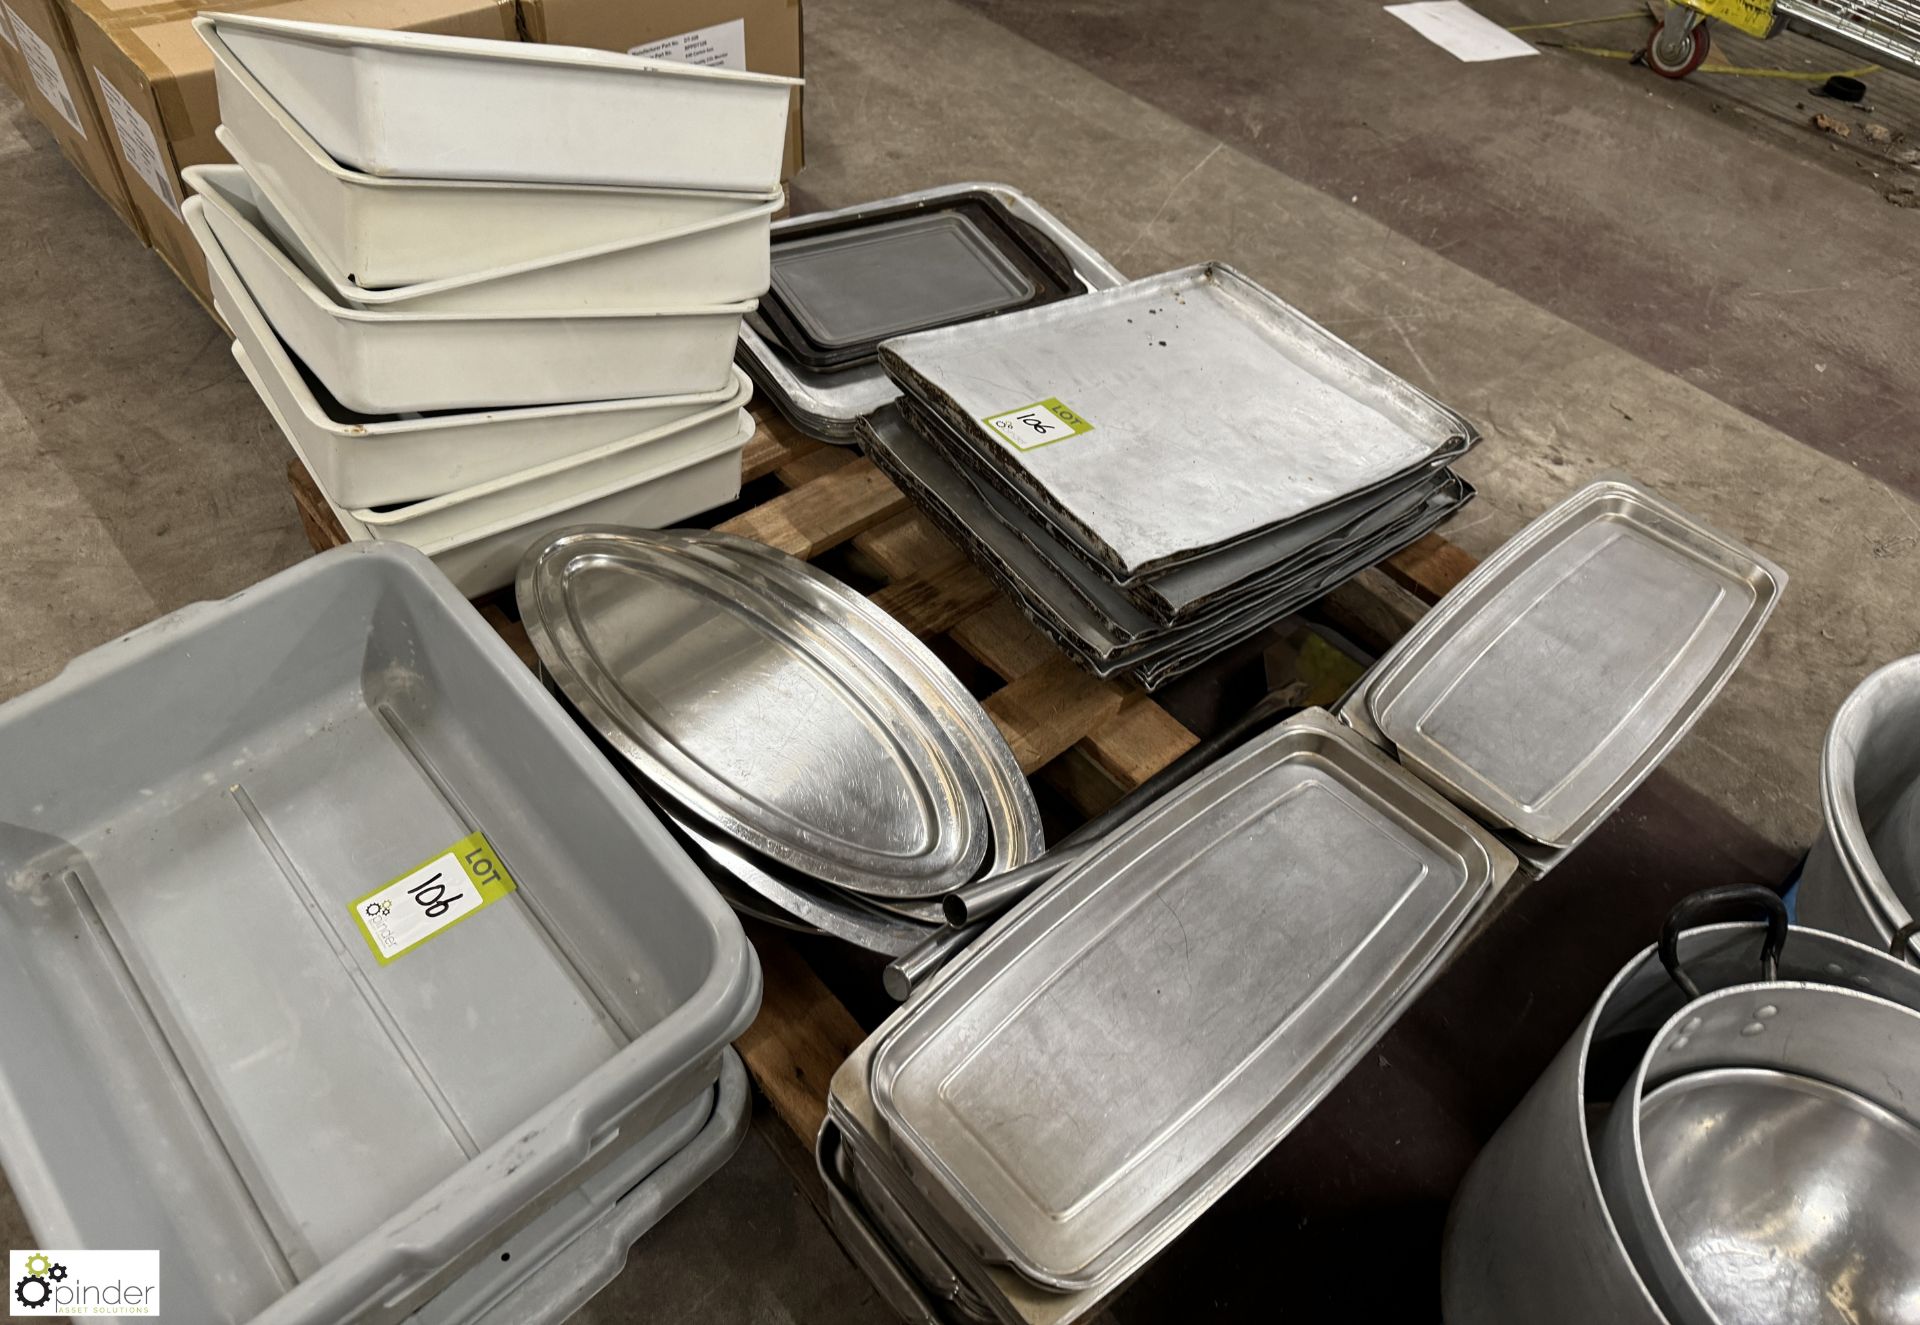 Quantity Baking Trays, Serving Trays, Plastic Trays, etc, to pallet - Image 3 of 5